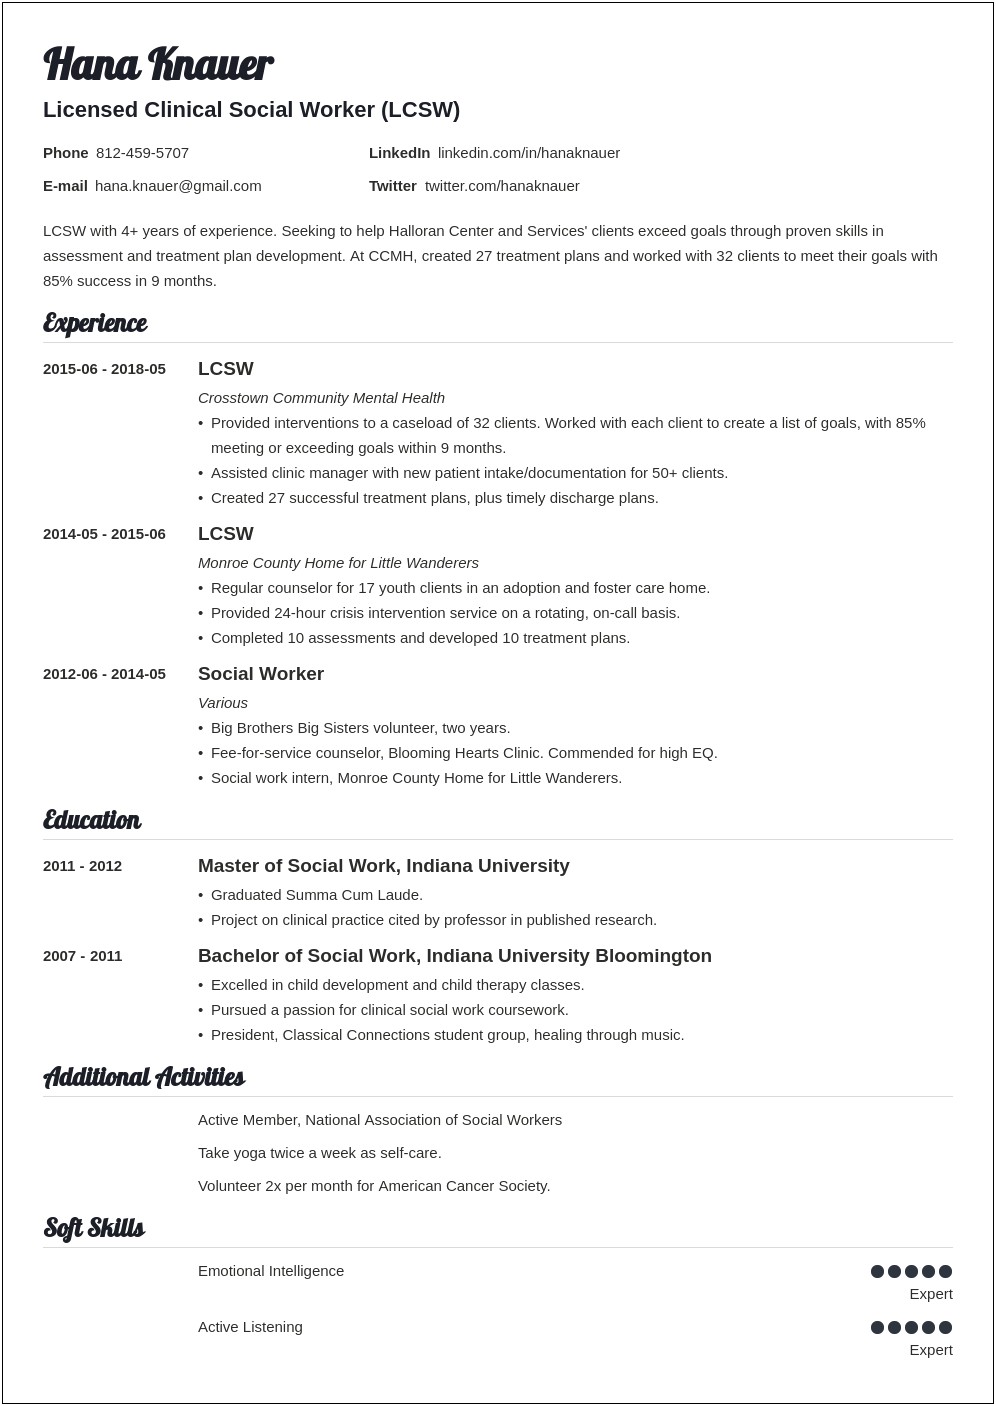 Resume Samples For Social Workers Objective